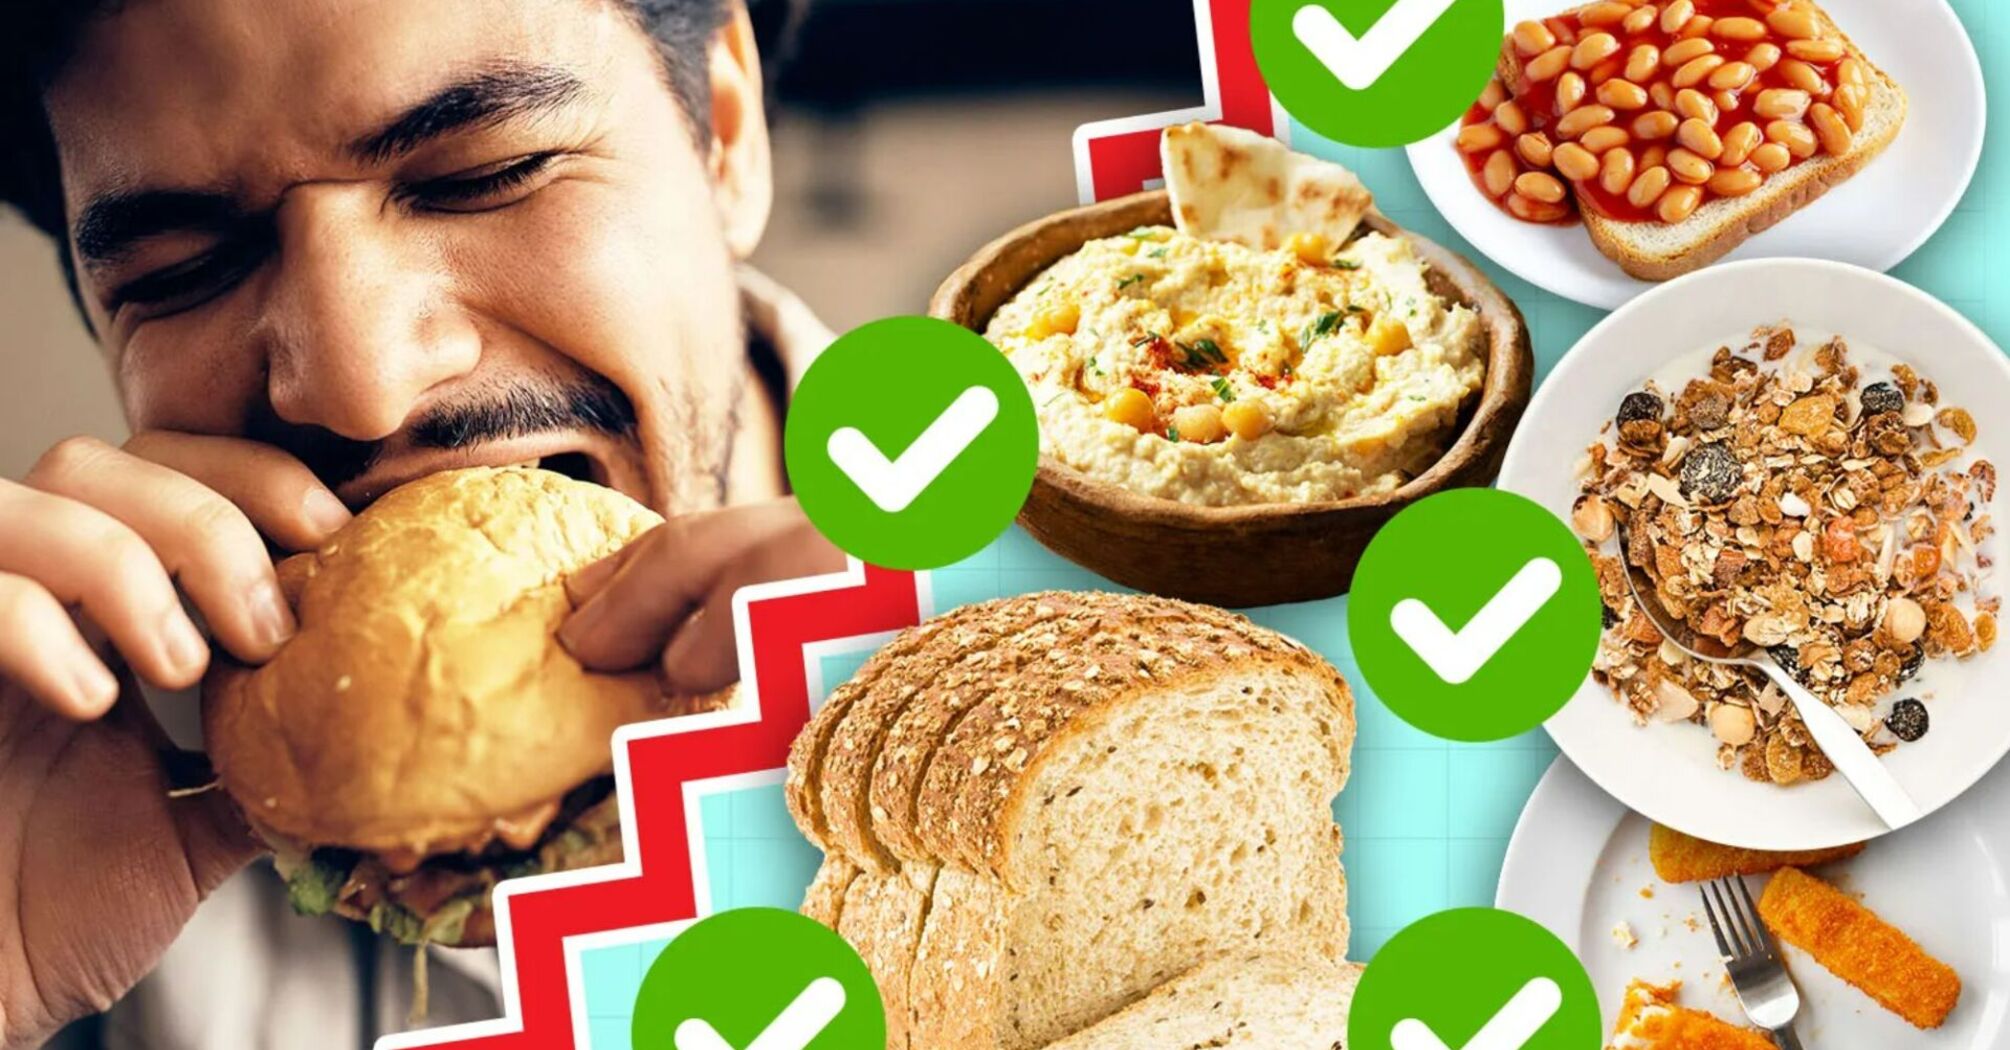 8 ultra-processed foods that you can eat